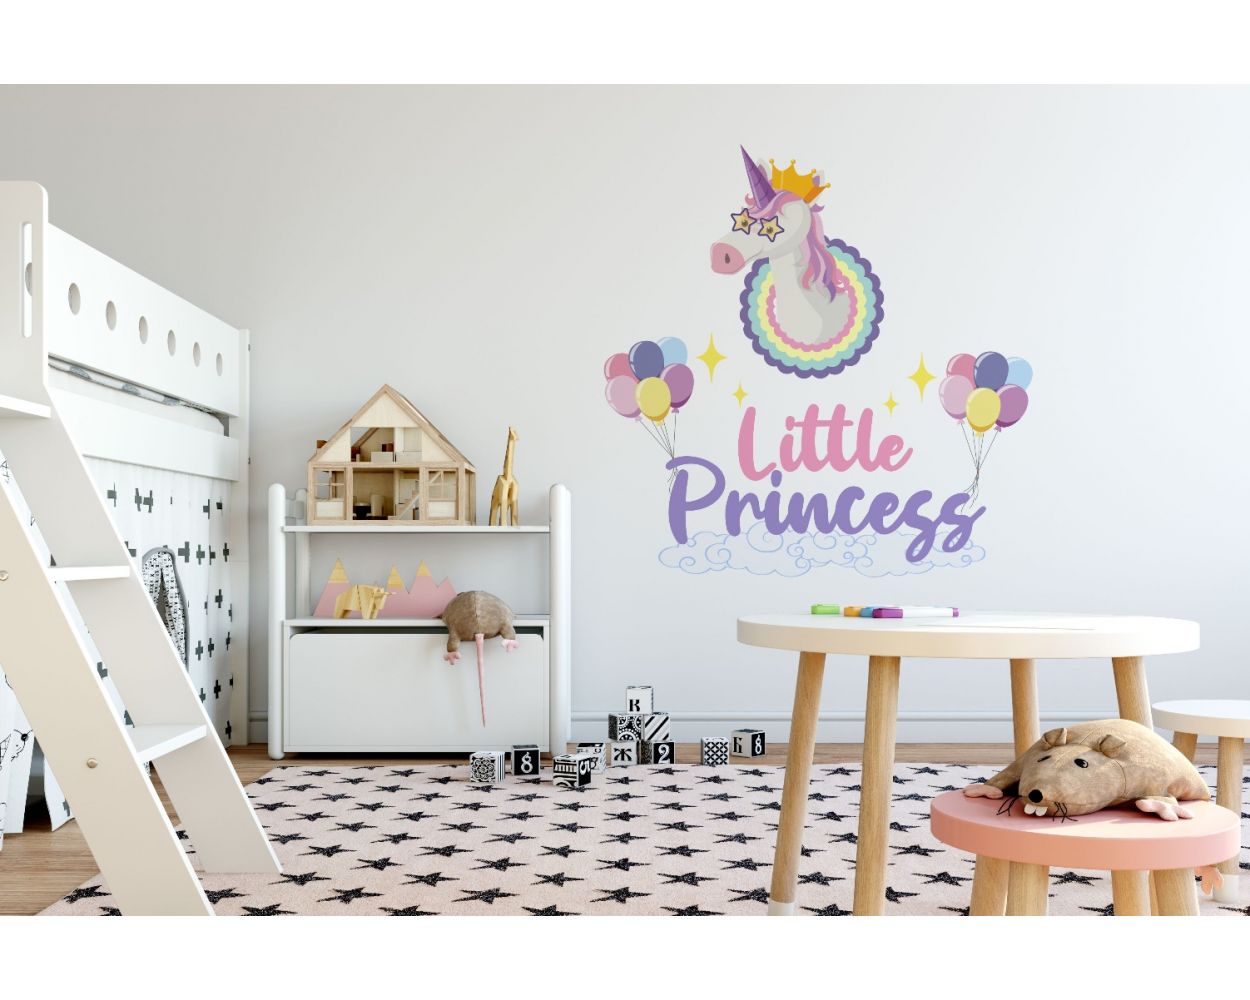 Cute & Beautiful Unicorn Vinyl Wall Decals For Your Little Princess Room Wall Decor